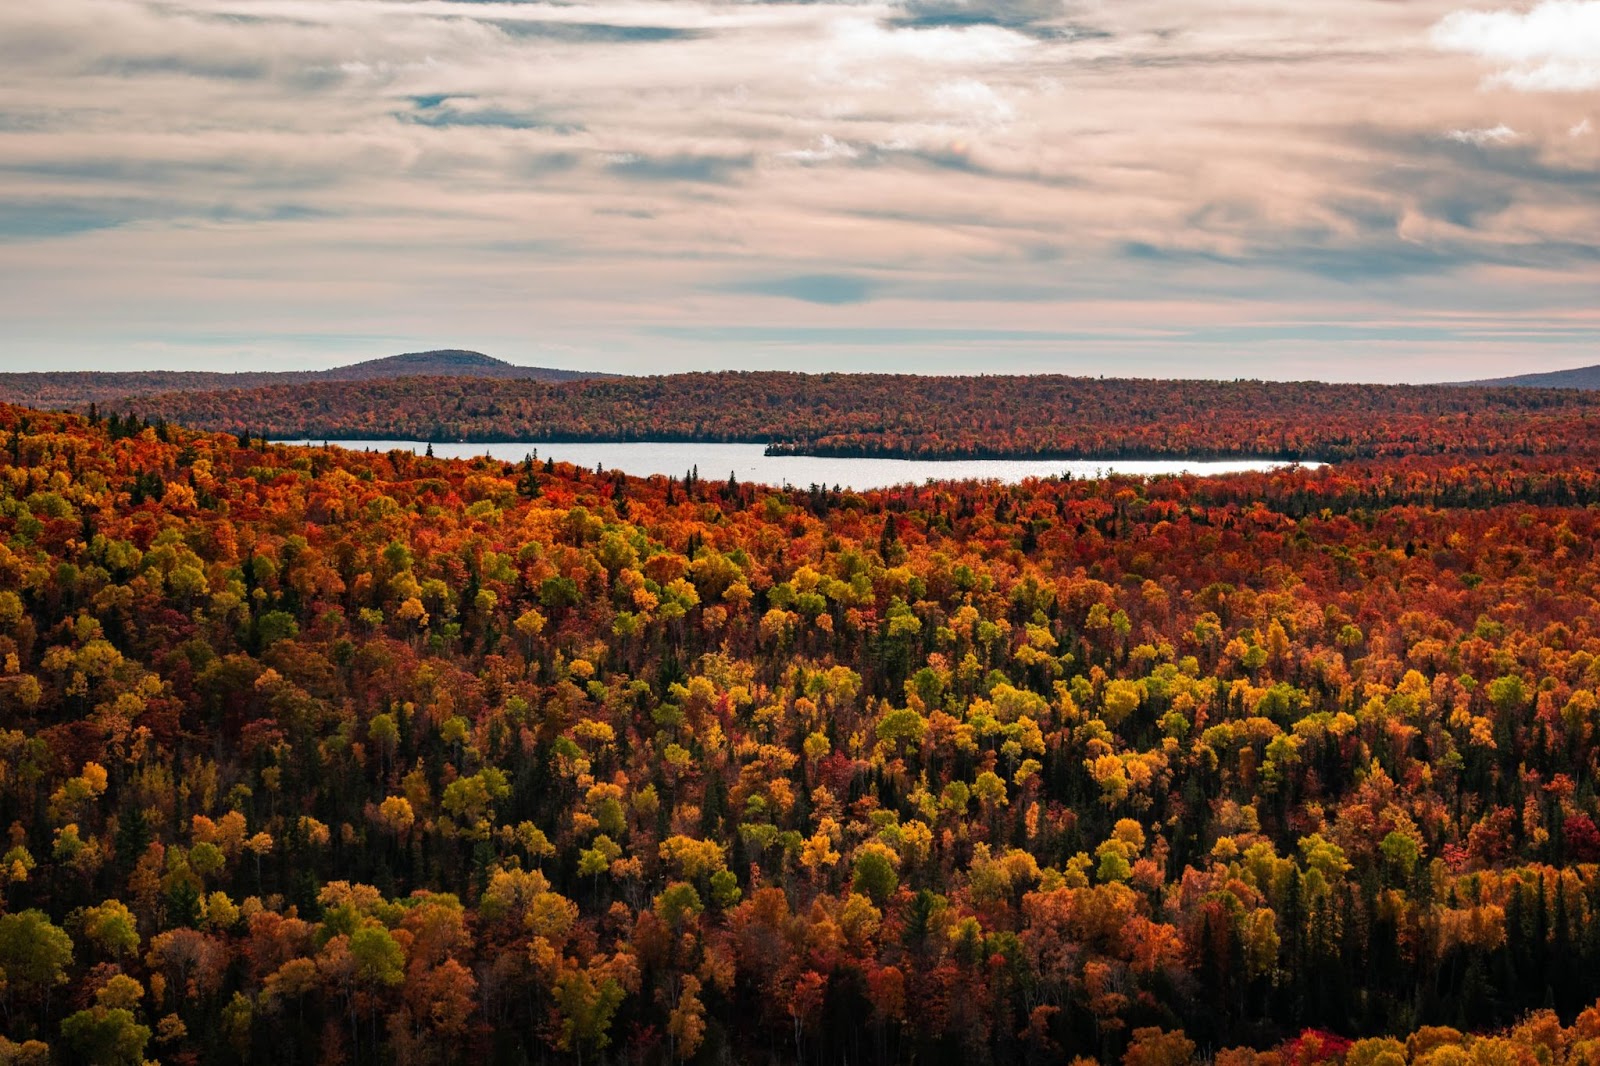 A forest full of fall colors, with a lake in the background in the distance